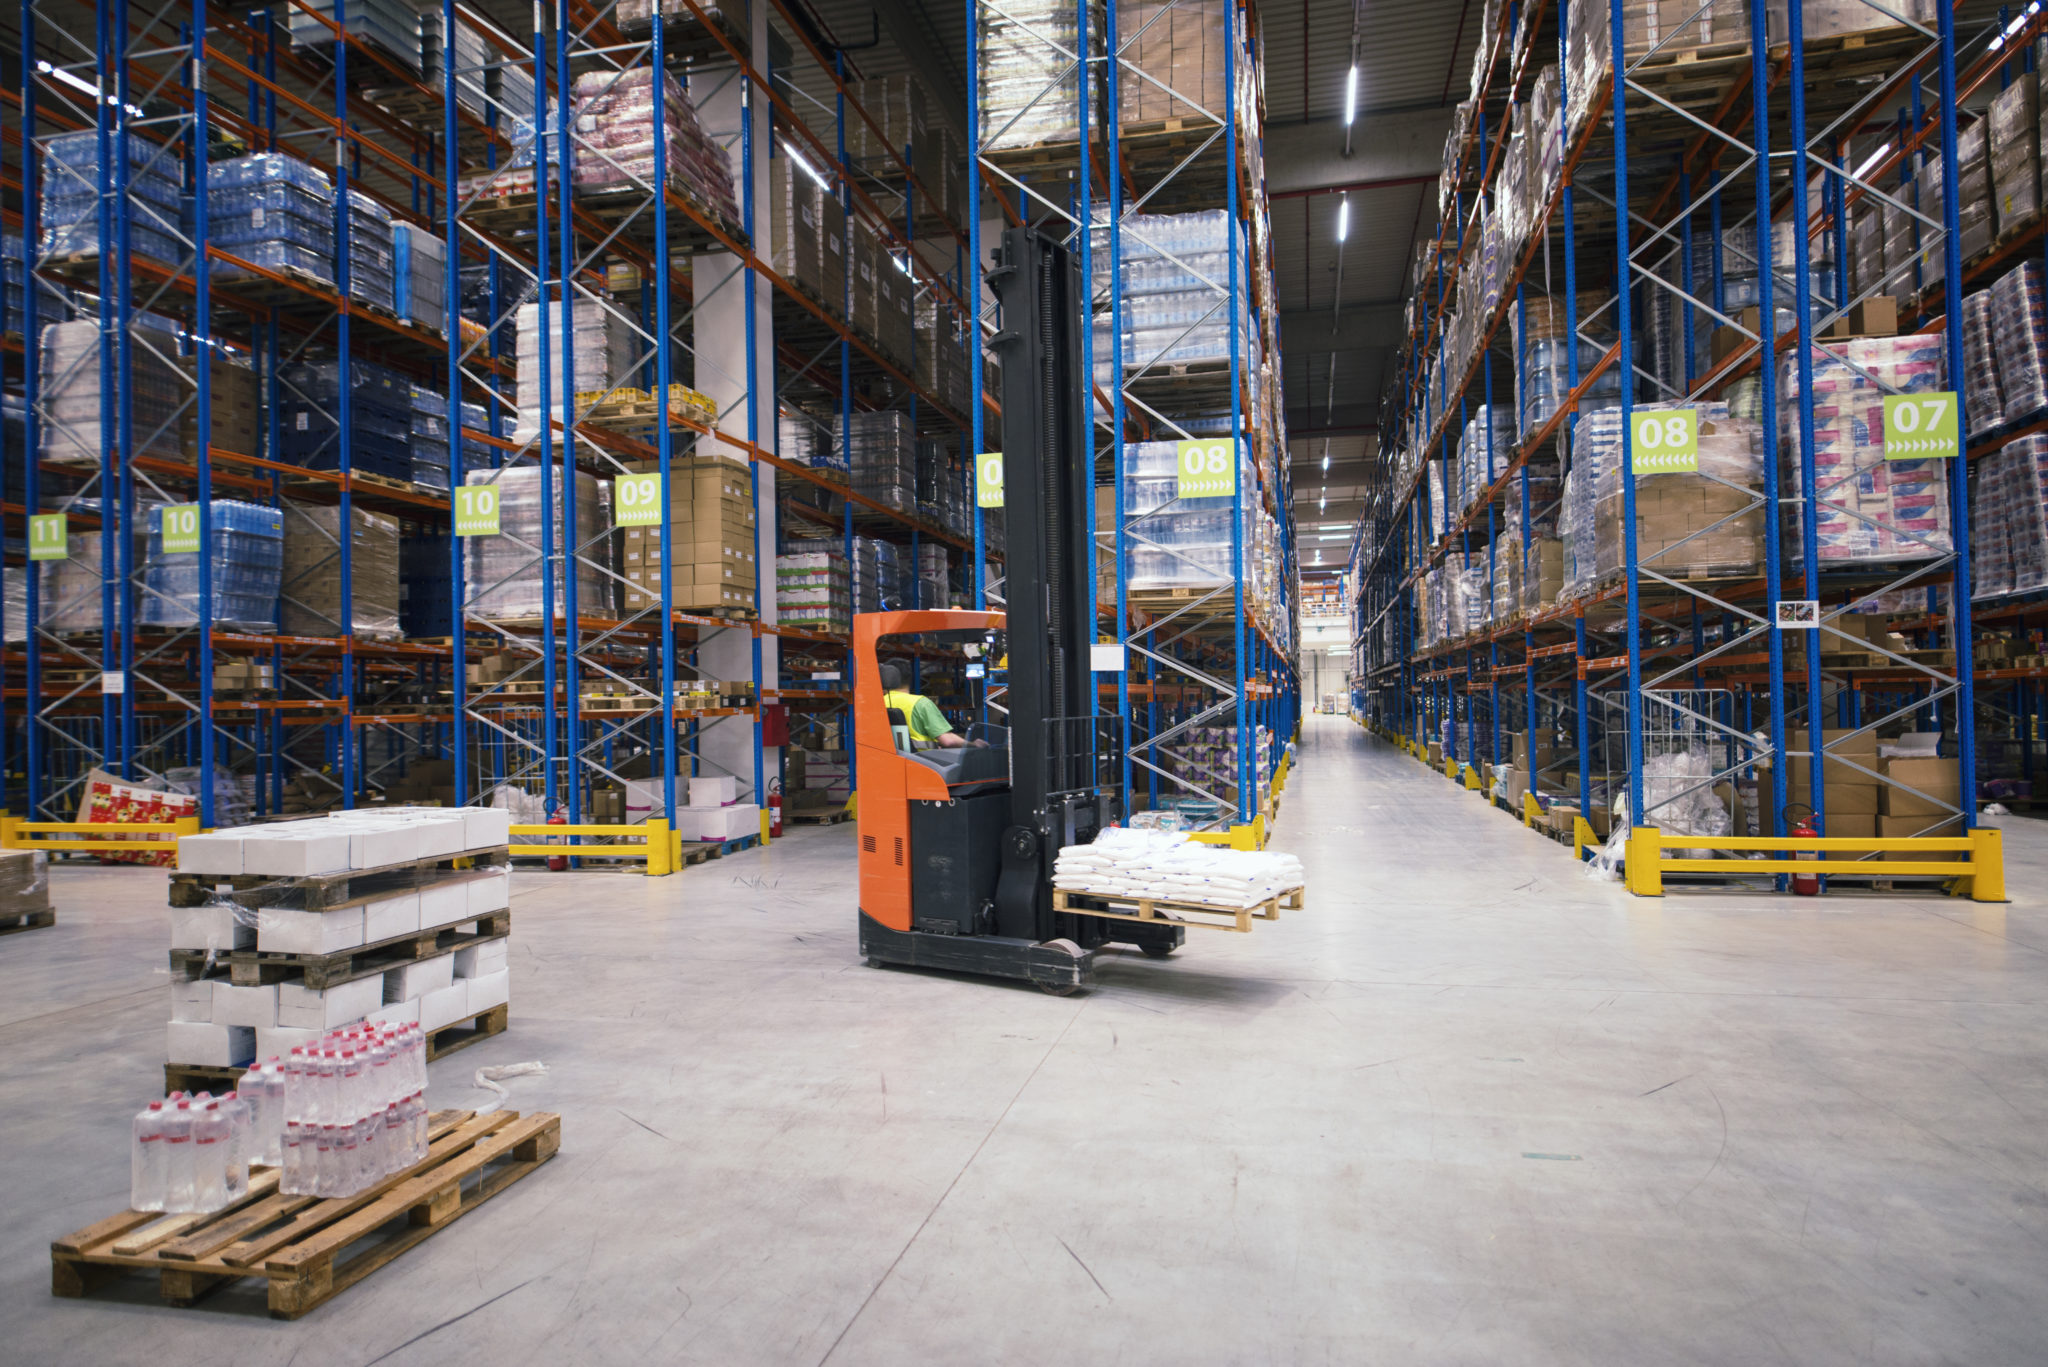 industrial-building-large-warehouse-interior-with-forklift-and-palette-with-goods-and-shelves